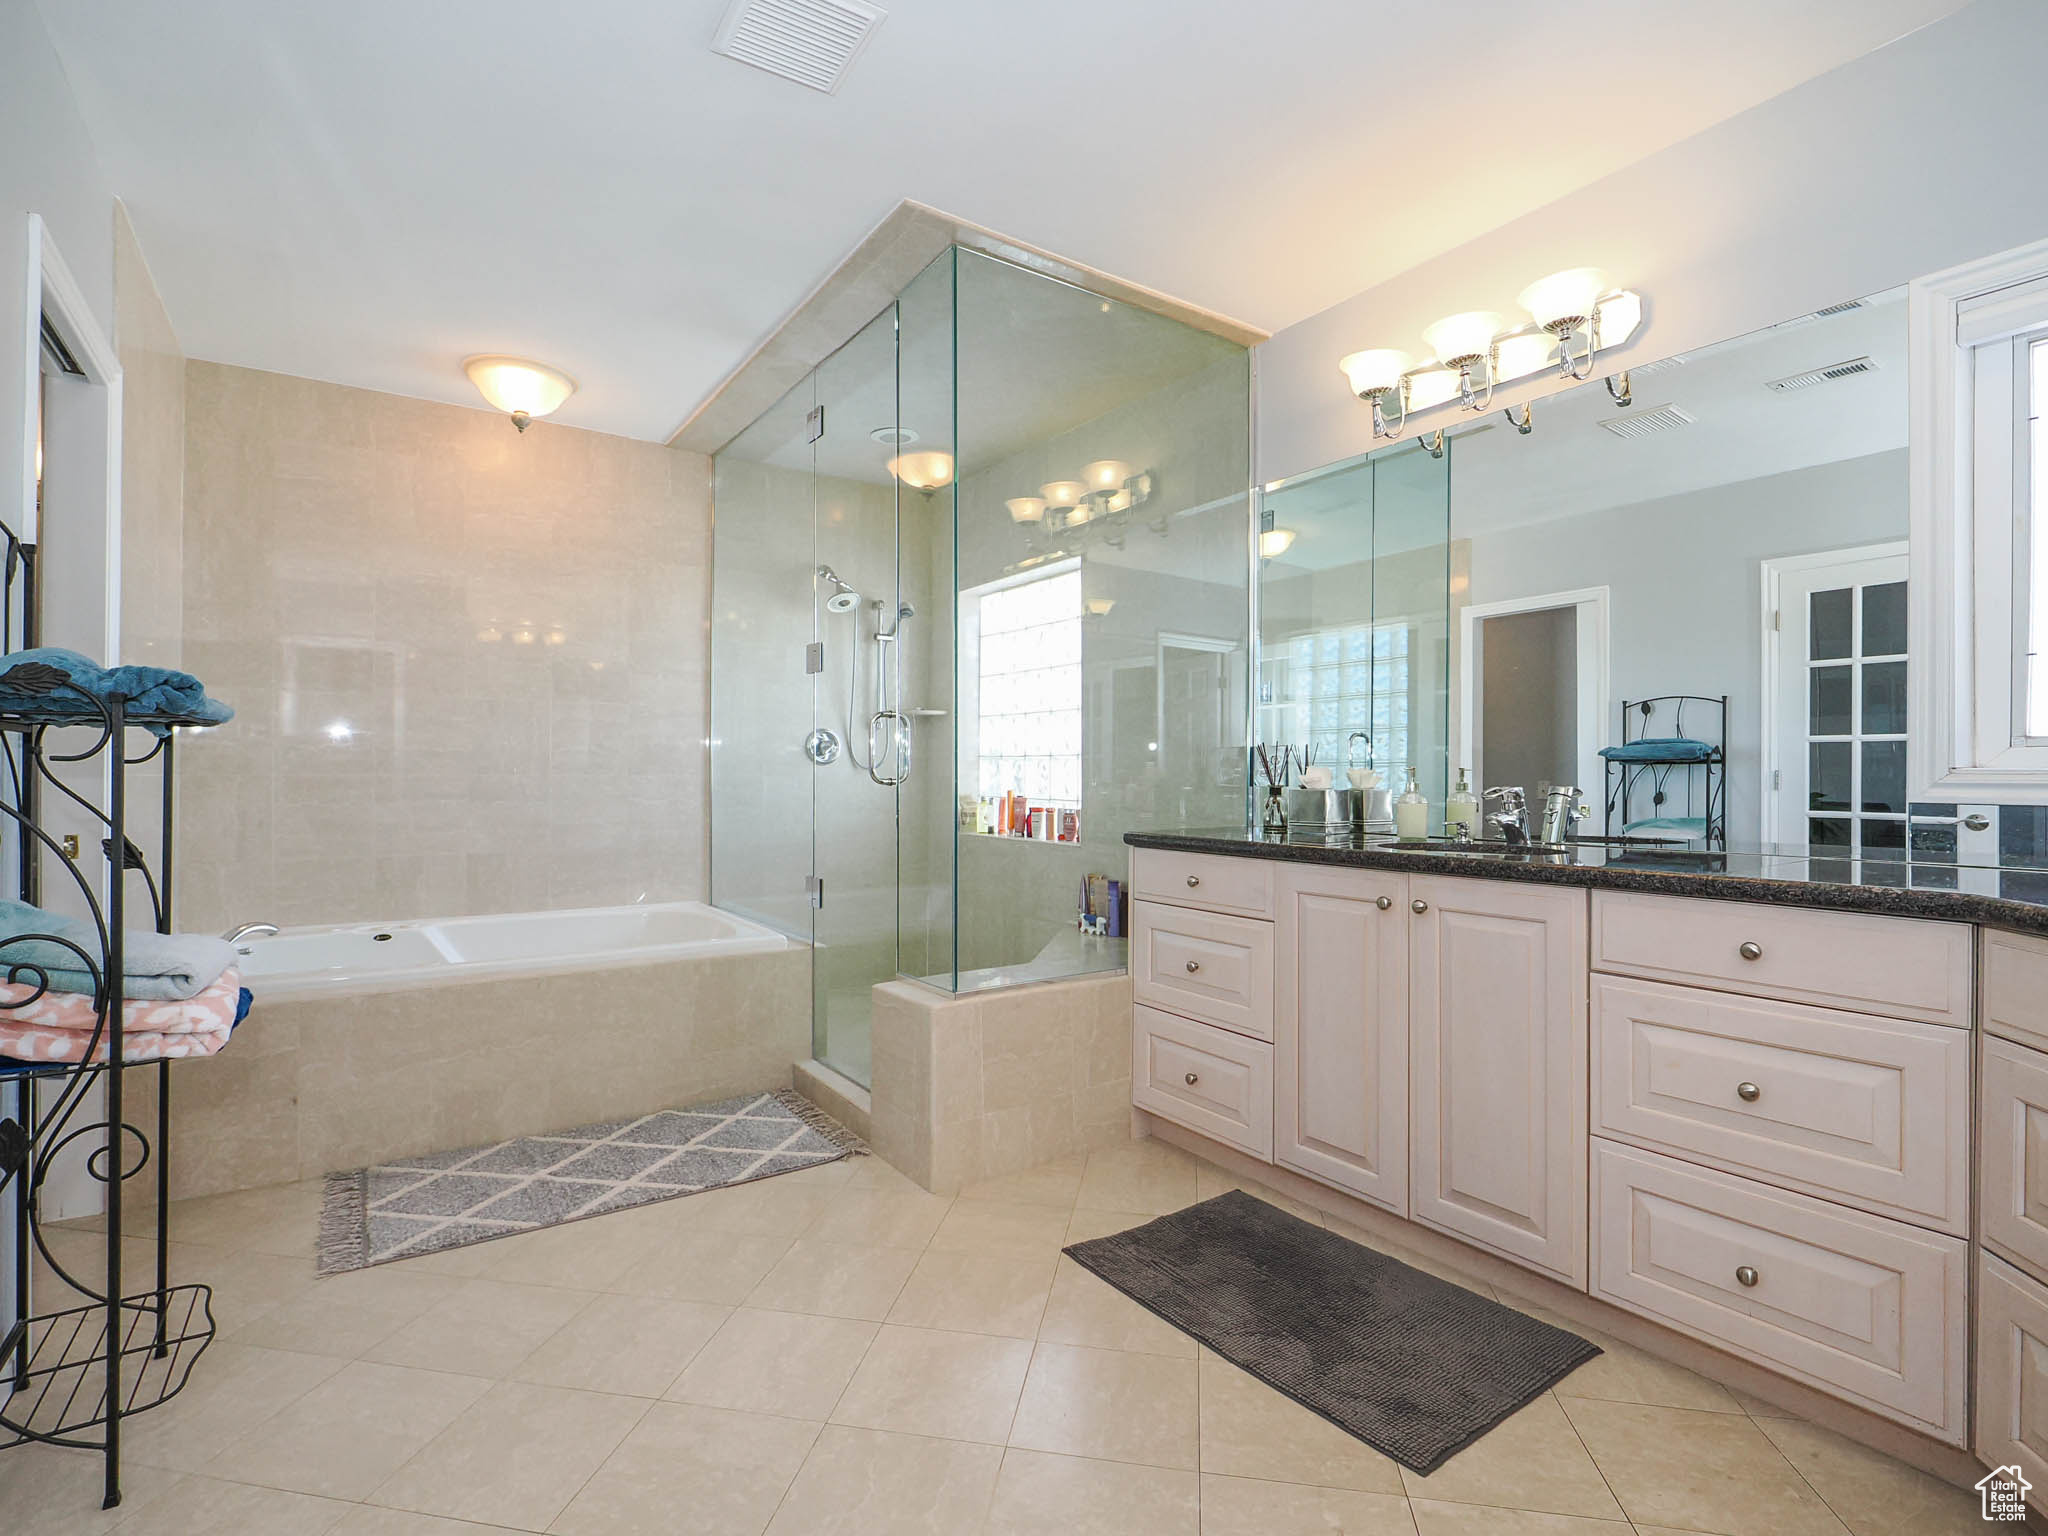 Primary Suite bathroom with double sink, separate glass enclosed shower and separate toilet room